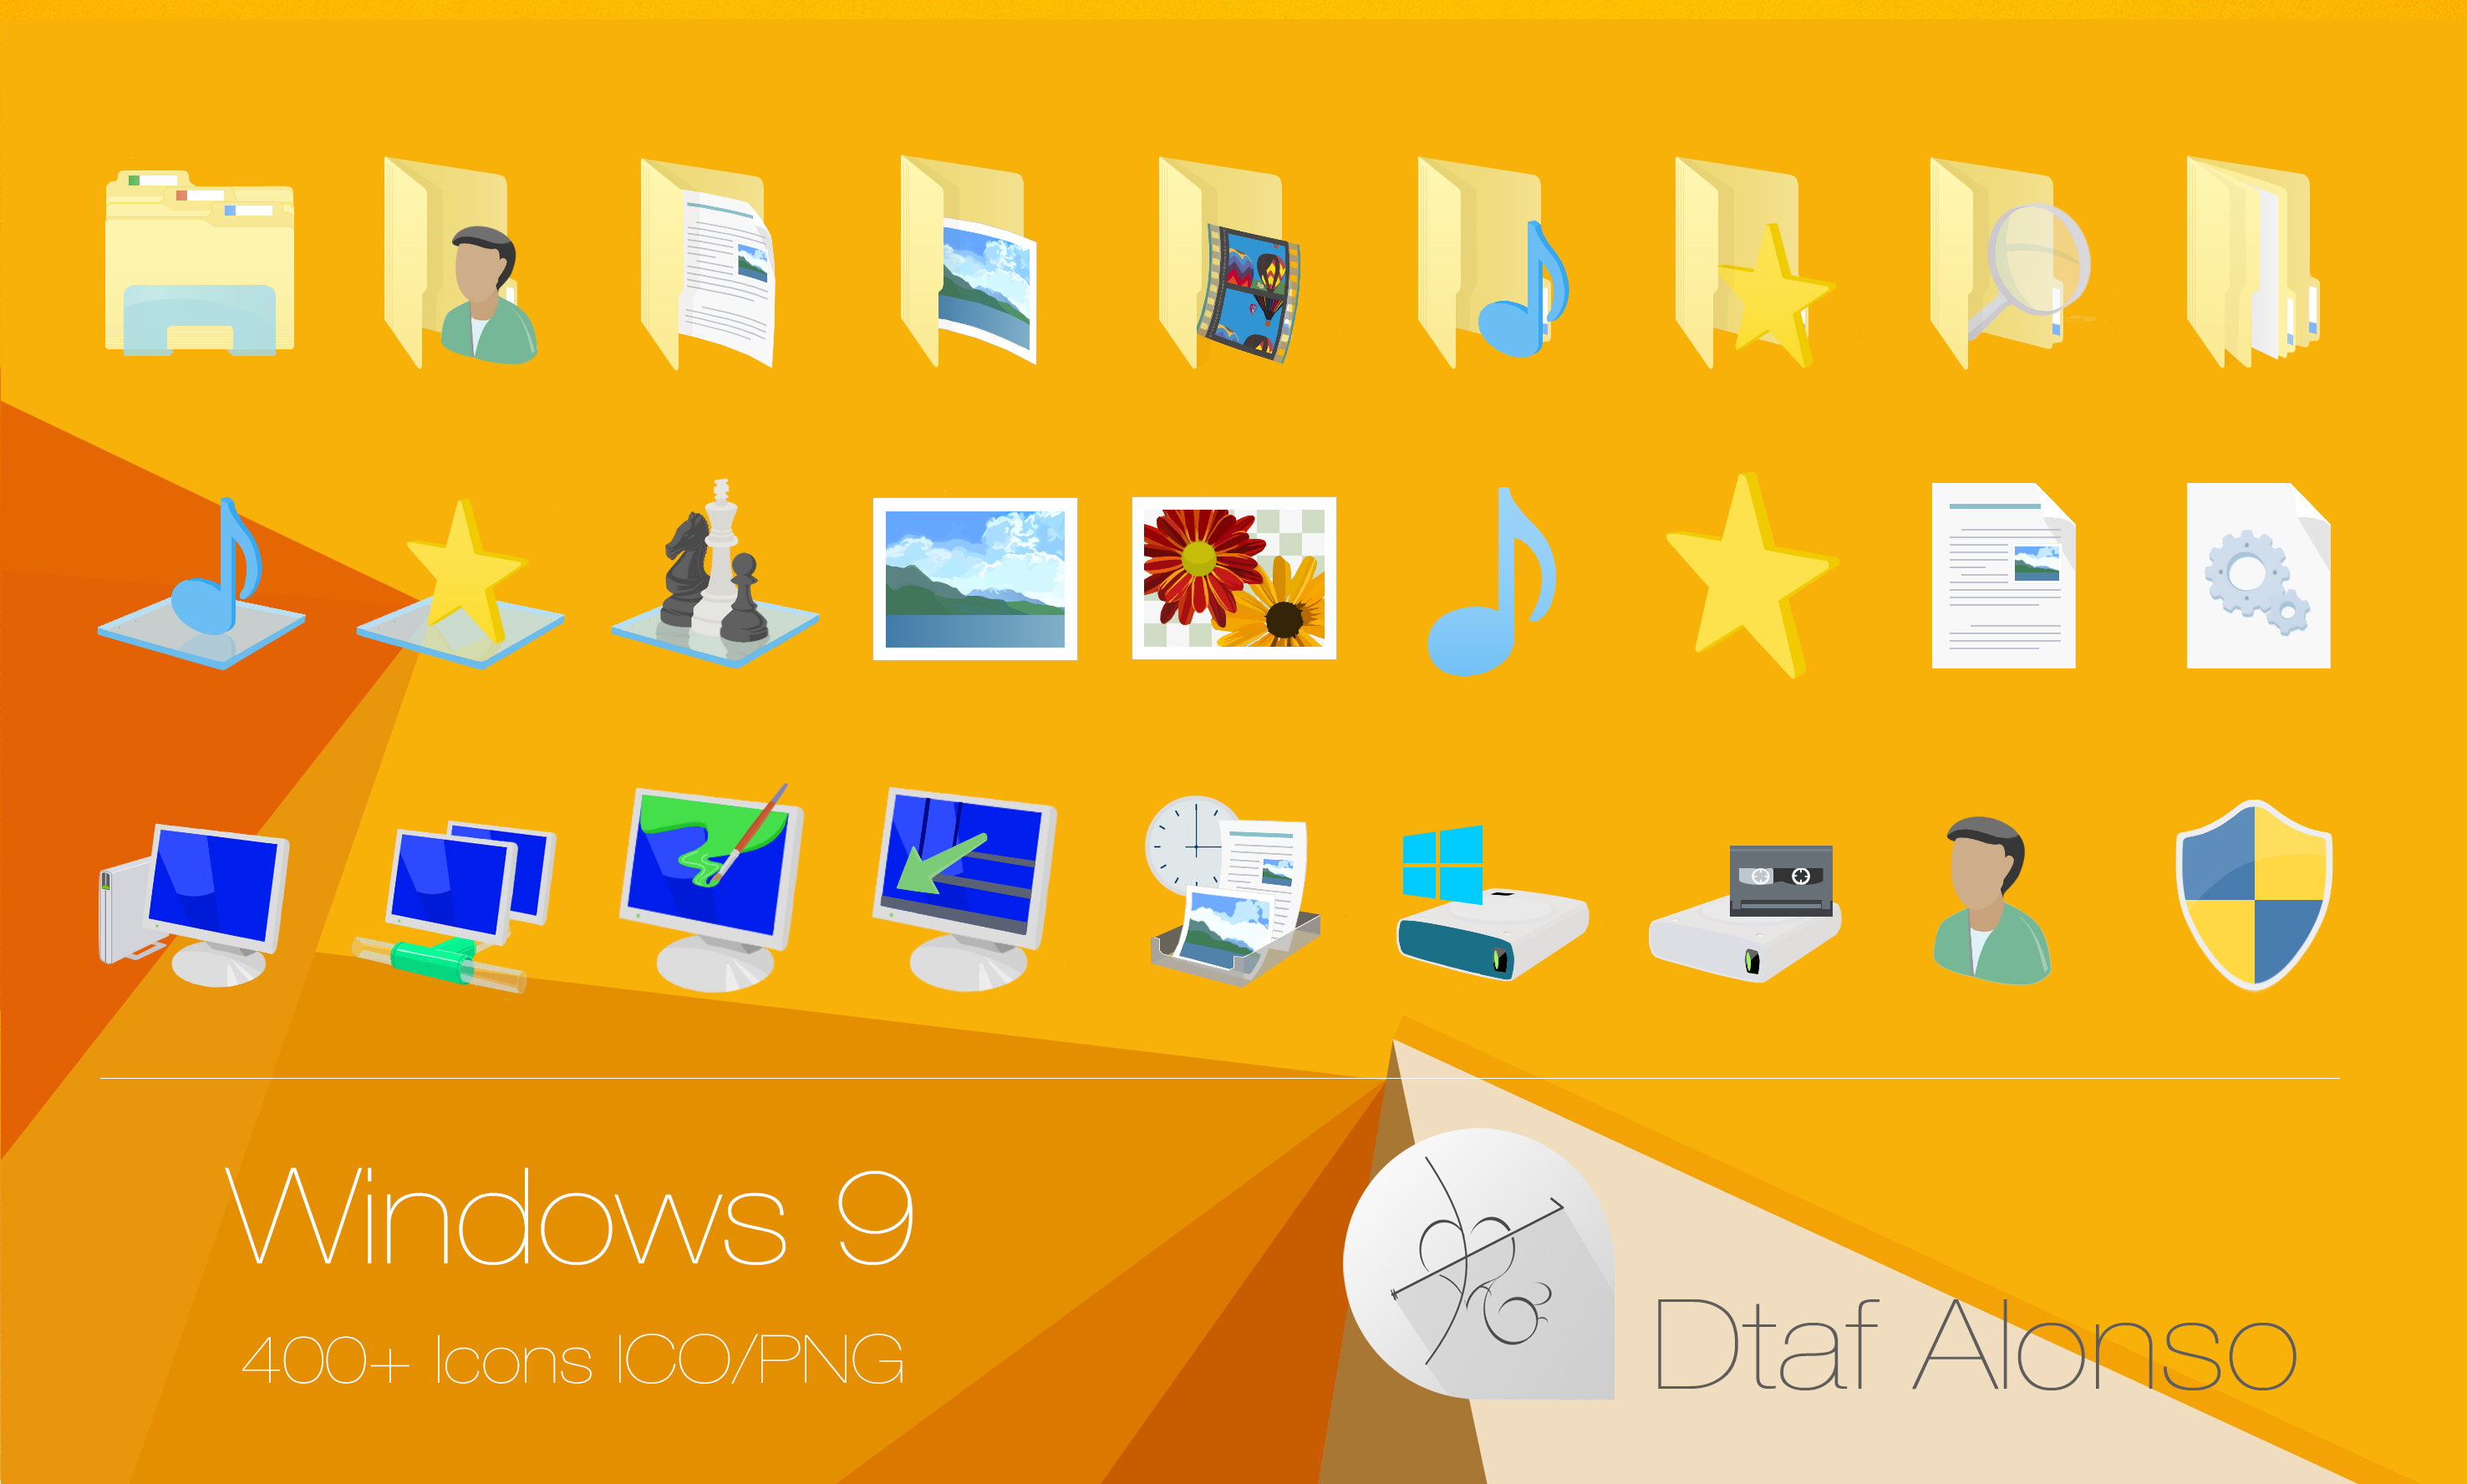 Get Windows 8 icons back in Windows 10